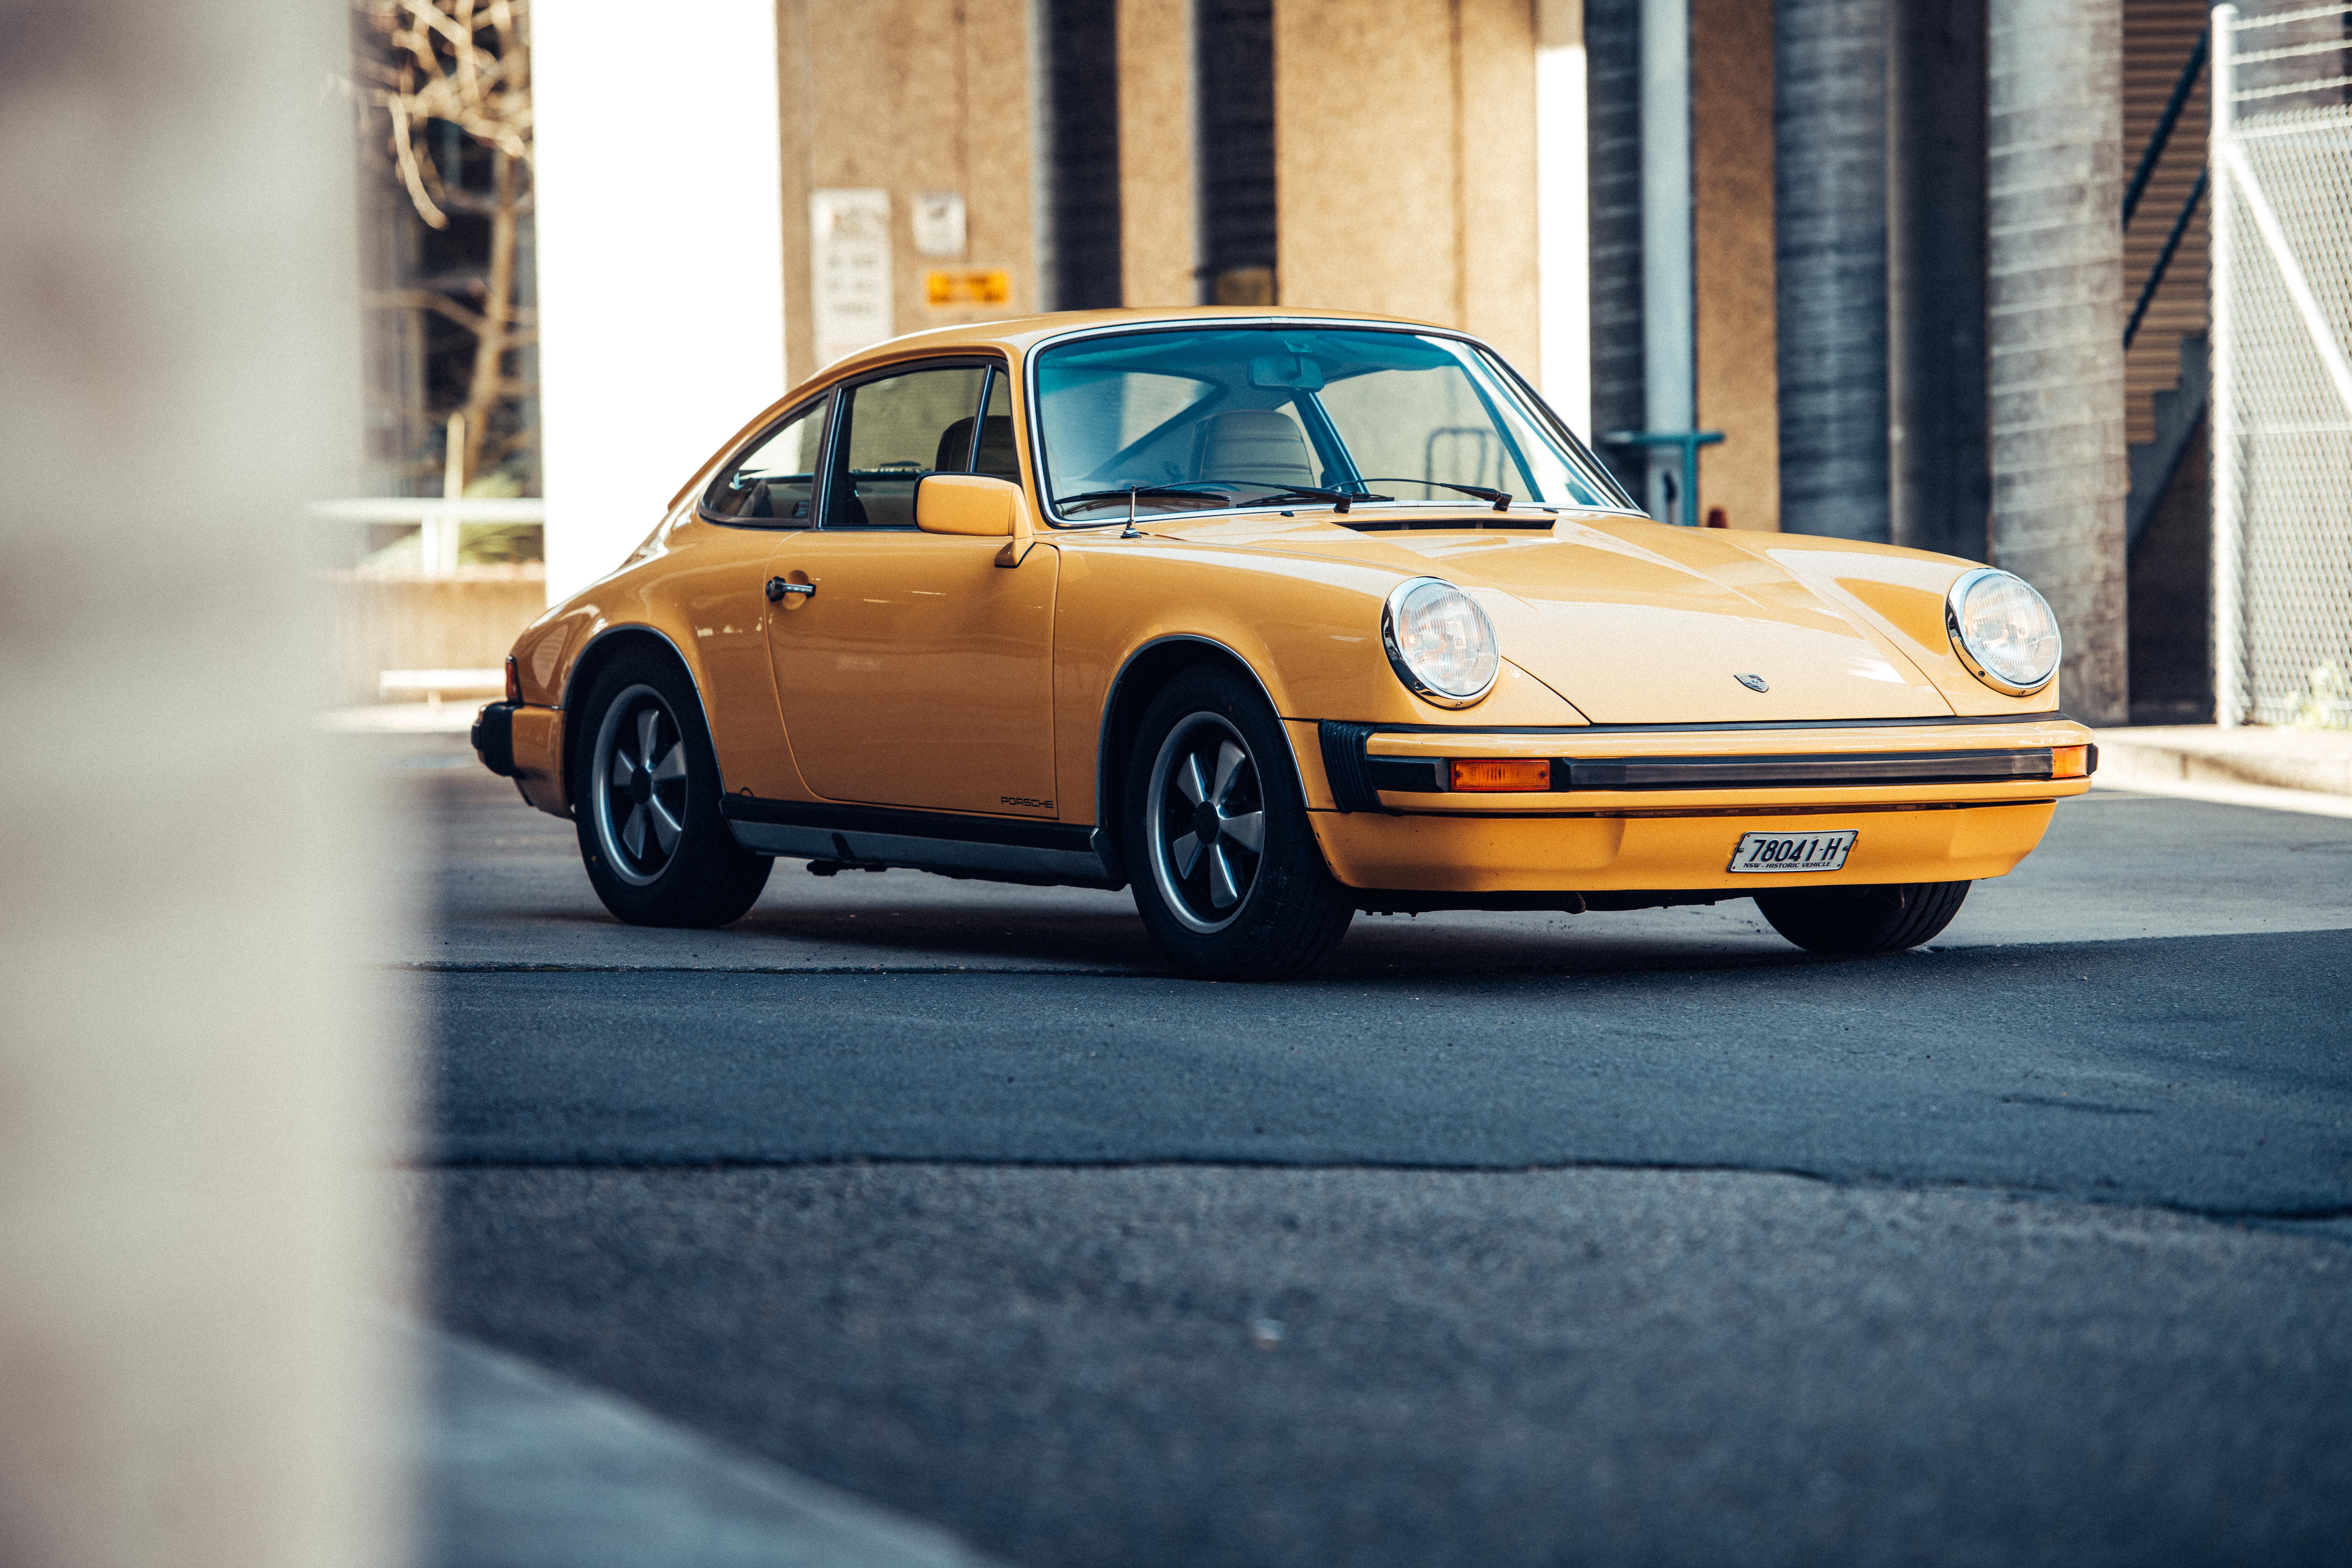 Classic bright yellow Porsche 911 parked in street